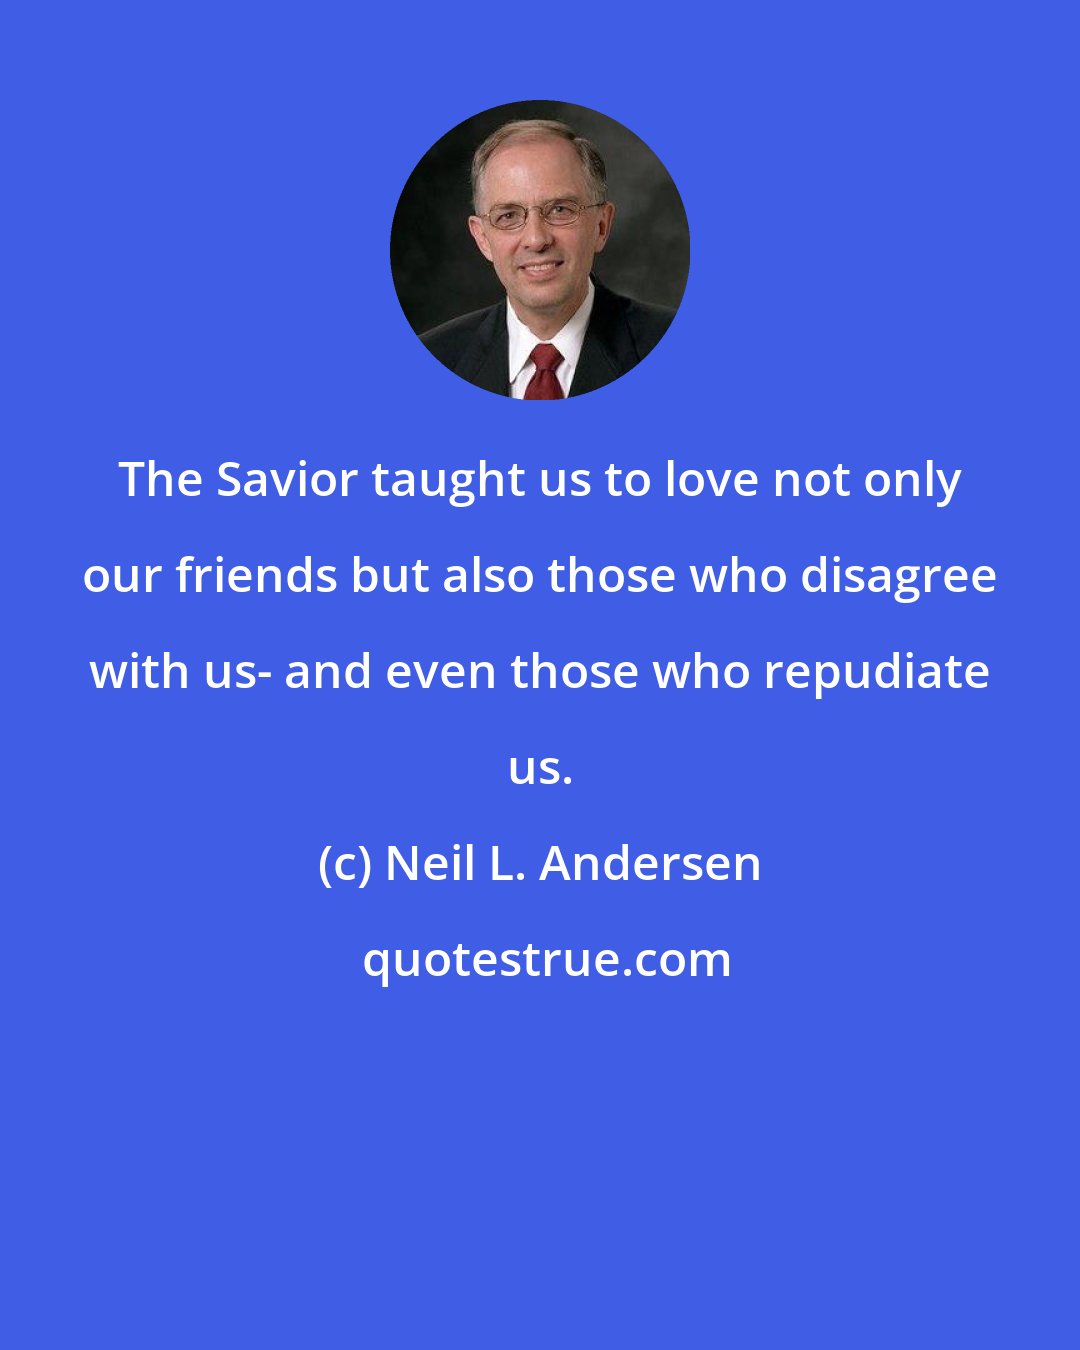 Neil L. Andersen: The Savior taught us to love not only our friends but also those who disagree with us- and even those who repudiate us.